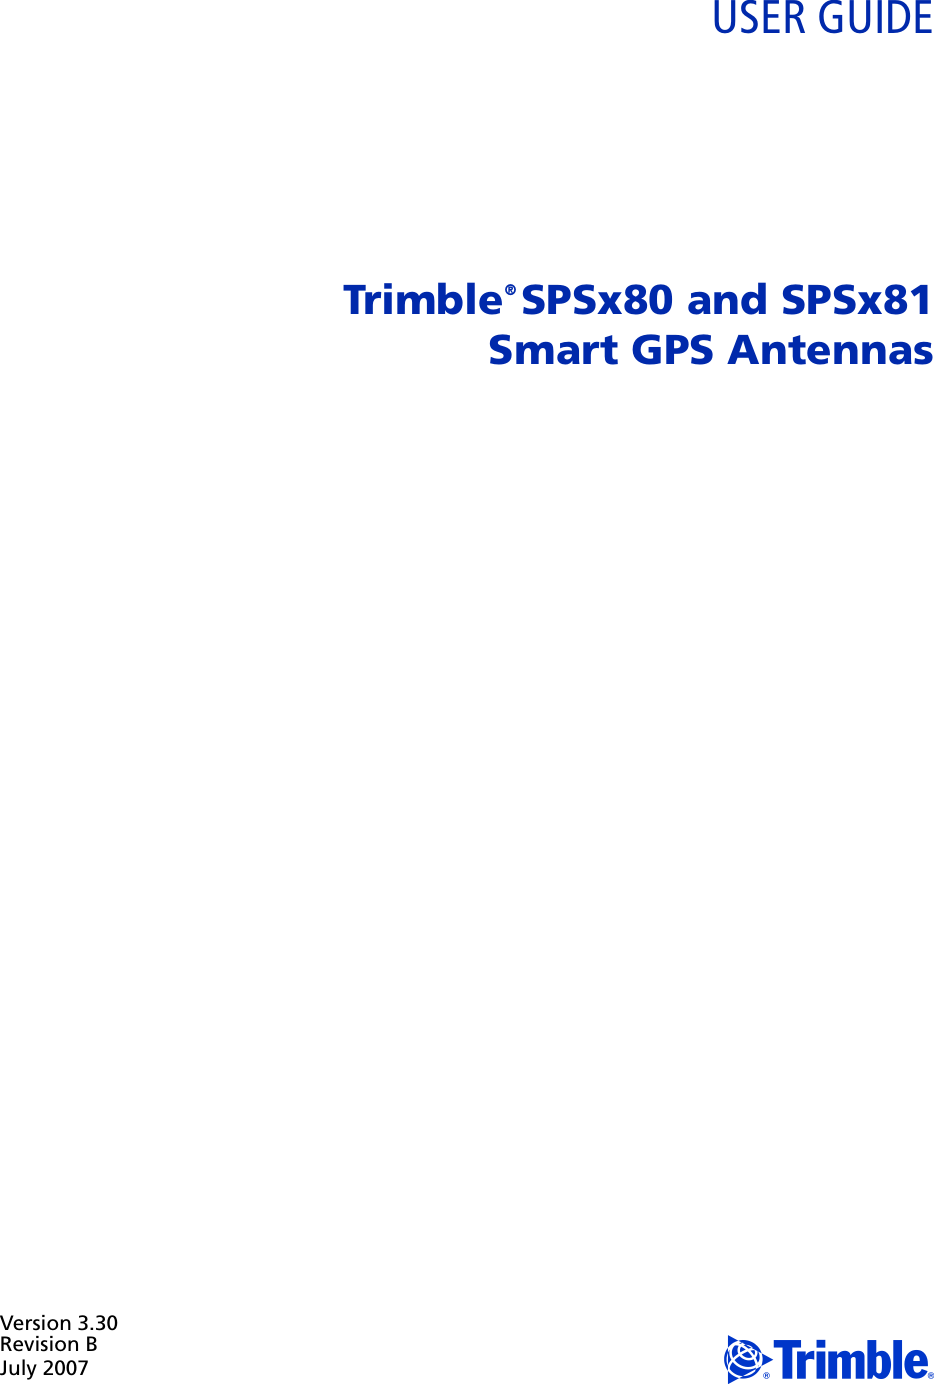 Version 3.30Revision BJuly 2007 FUSER GUIDETrimble® SPSx80 and SPSx81 Smart GPS Antennas